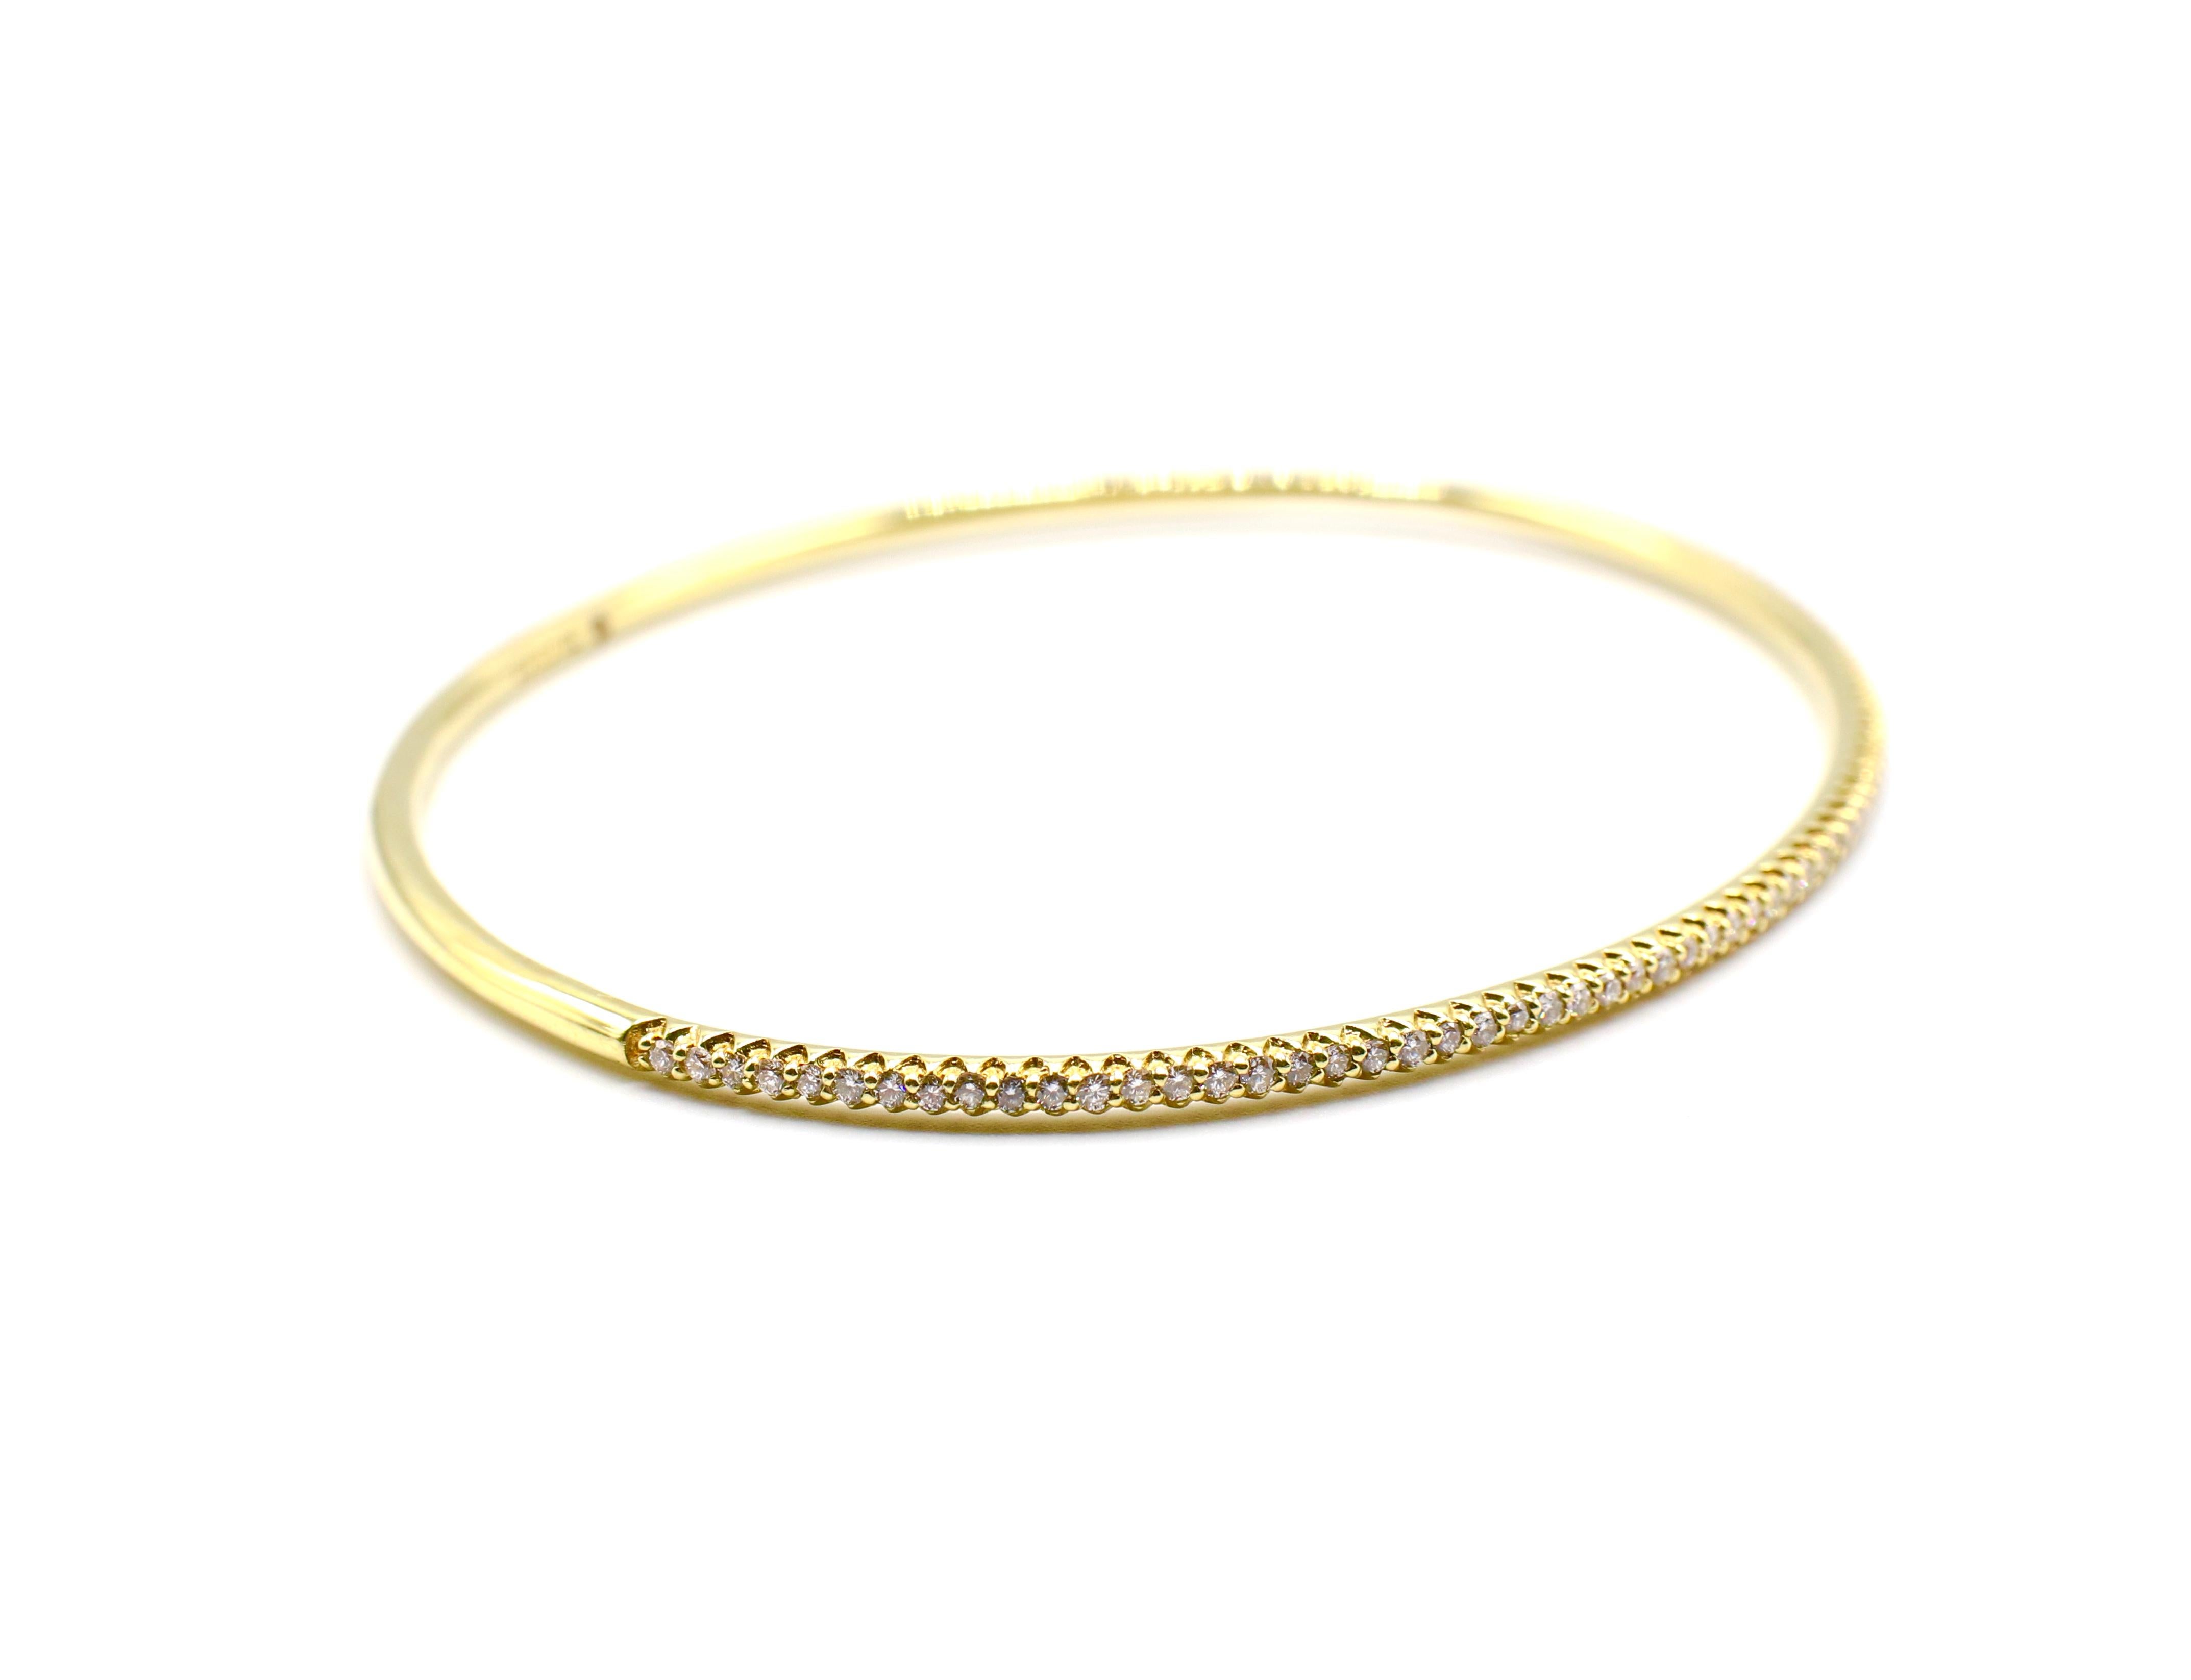 Roberto Coin Classic 18K Yellow Gold & Diamond 0.67ctw Thin Bangle Bracelet 

Metal: 18K Yellow Gold 750
Weight: 10.26 grams
Dimensions: Fits approx a 6.5-7 inch wrist
There are approximately 0.67ctw of pave diamonds G VS
1 round ruby inside -